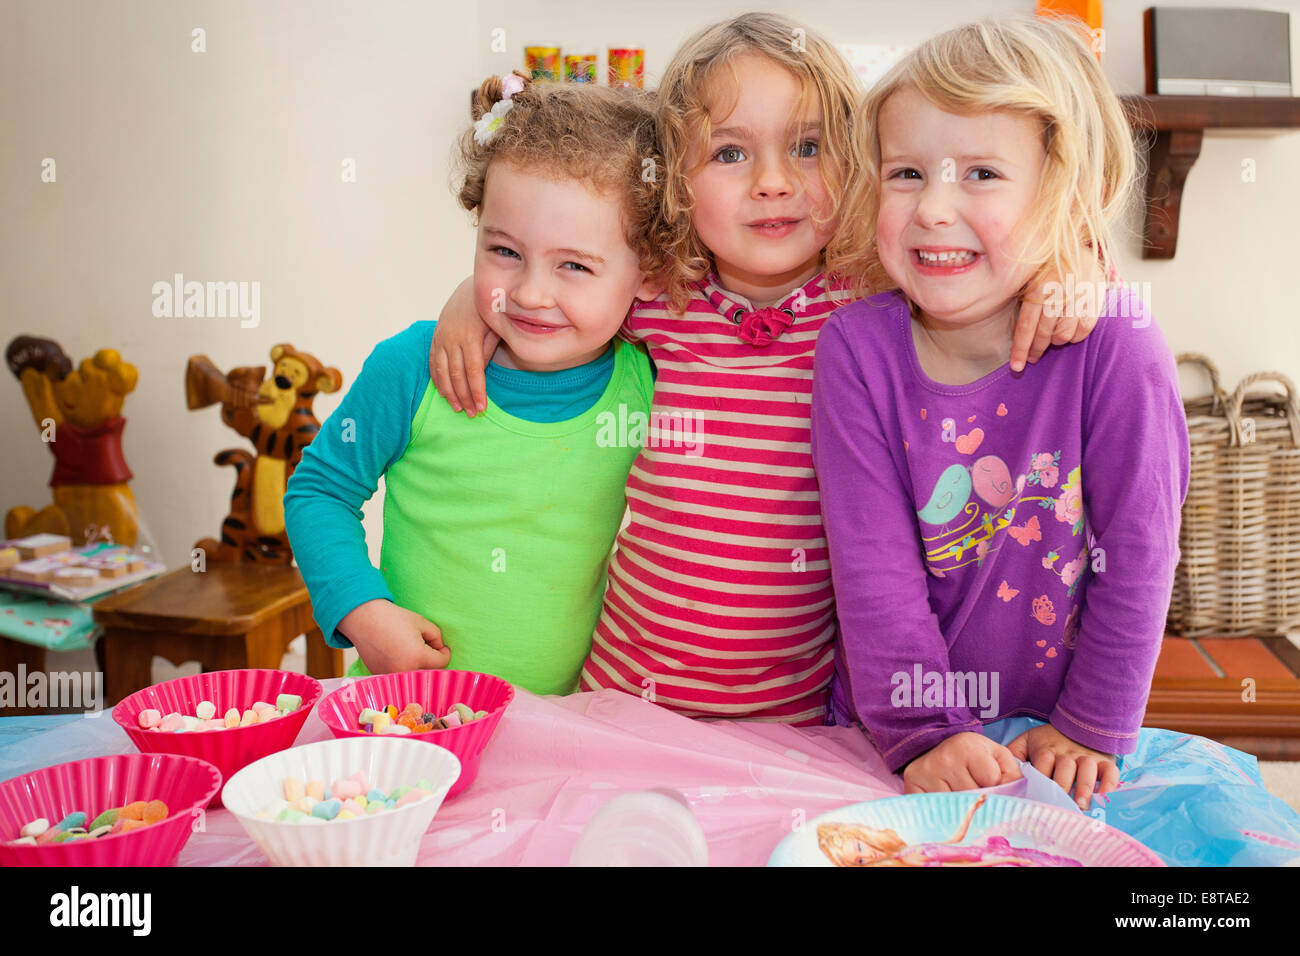 Three young girls pose for a birthday picture. Stock Photo